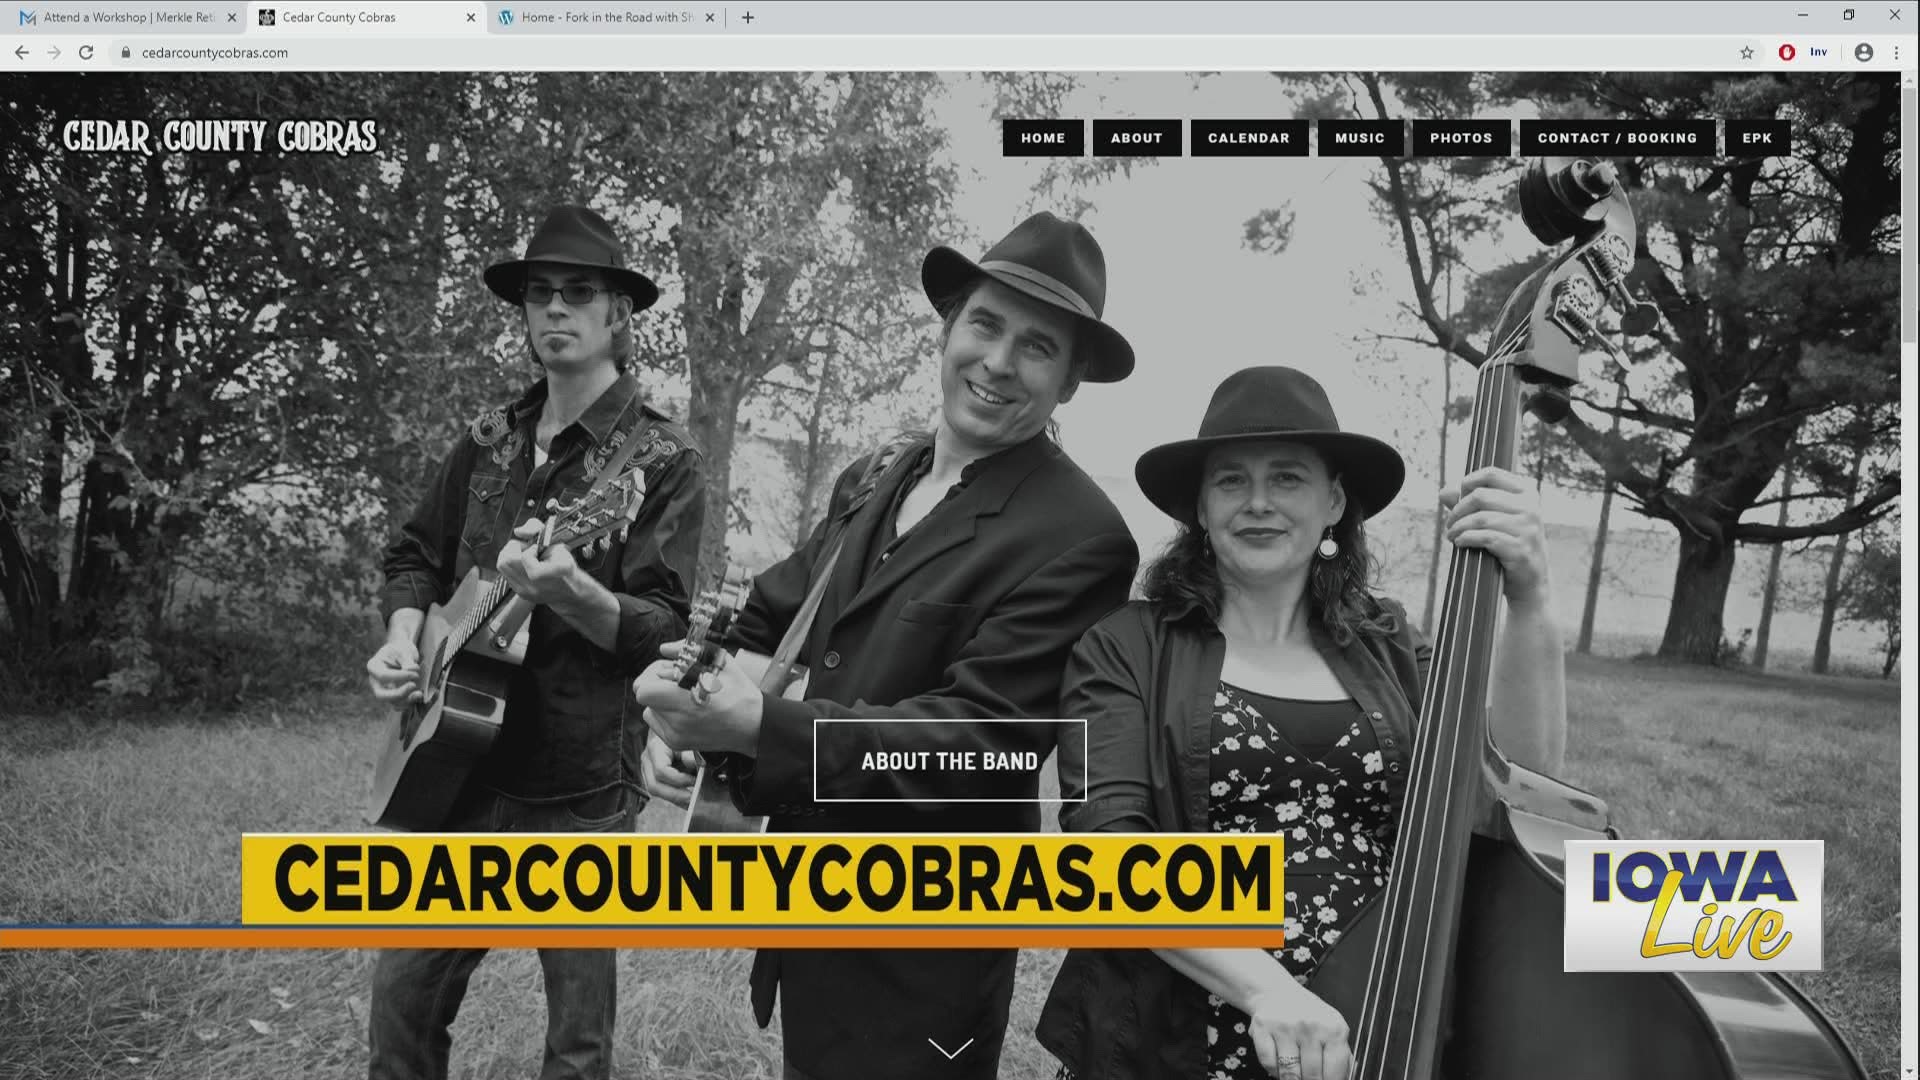 Tom from the Cedar County Cobras performs on 'Iowa Live' this morning